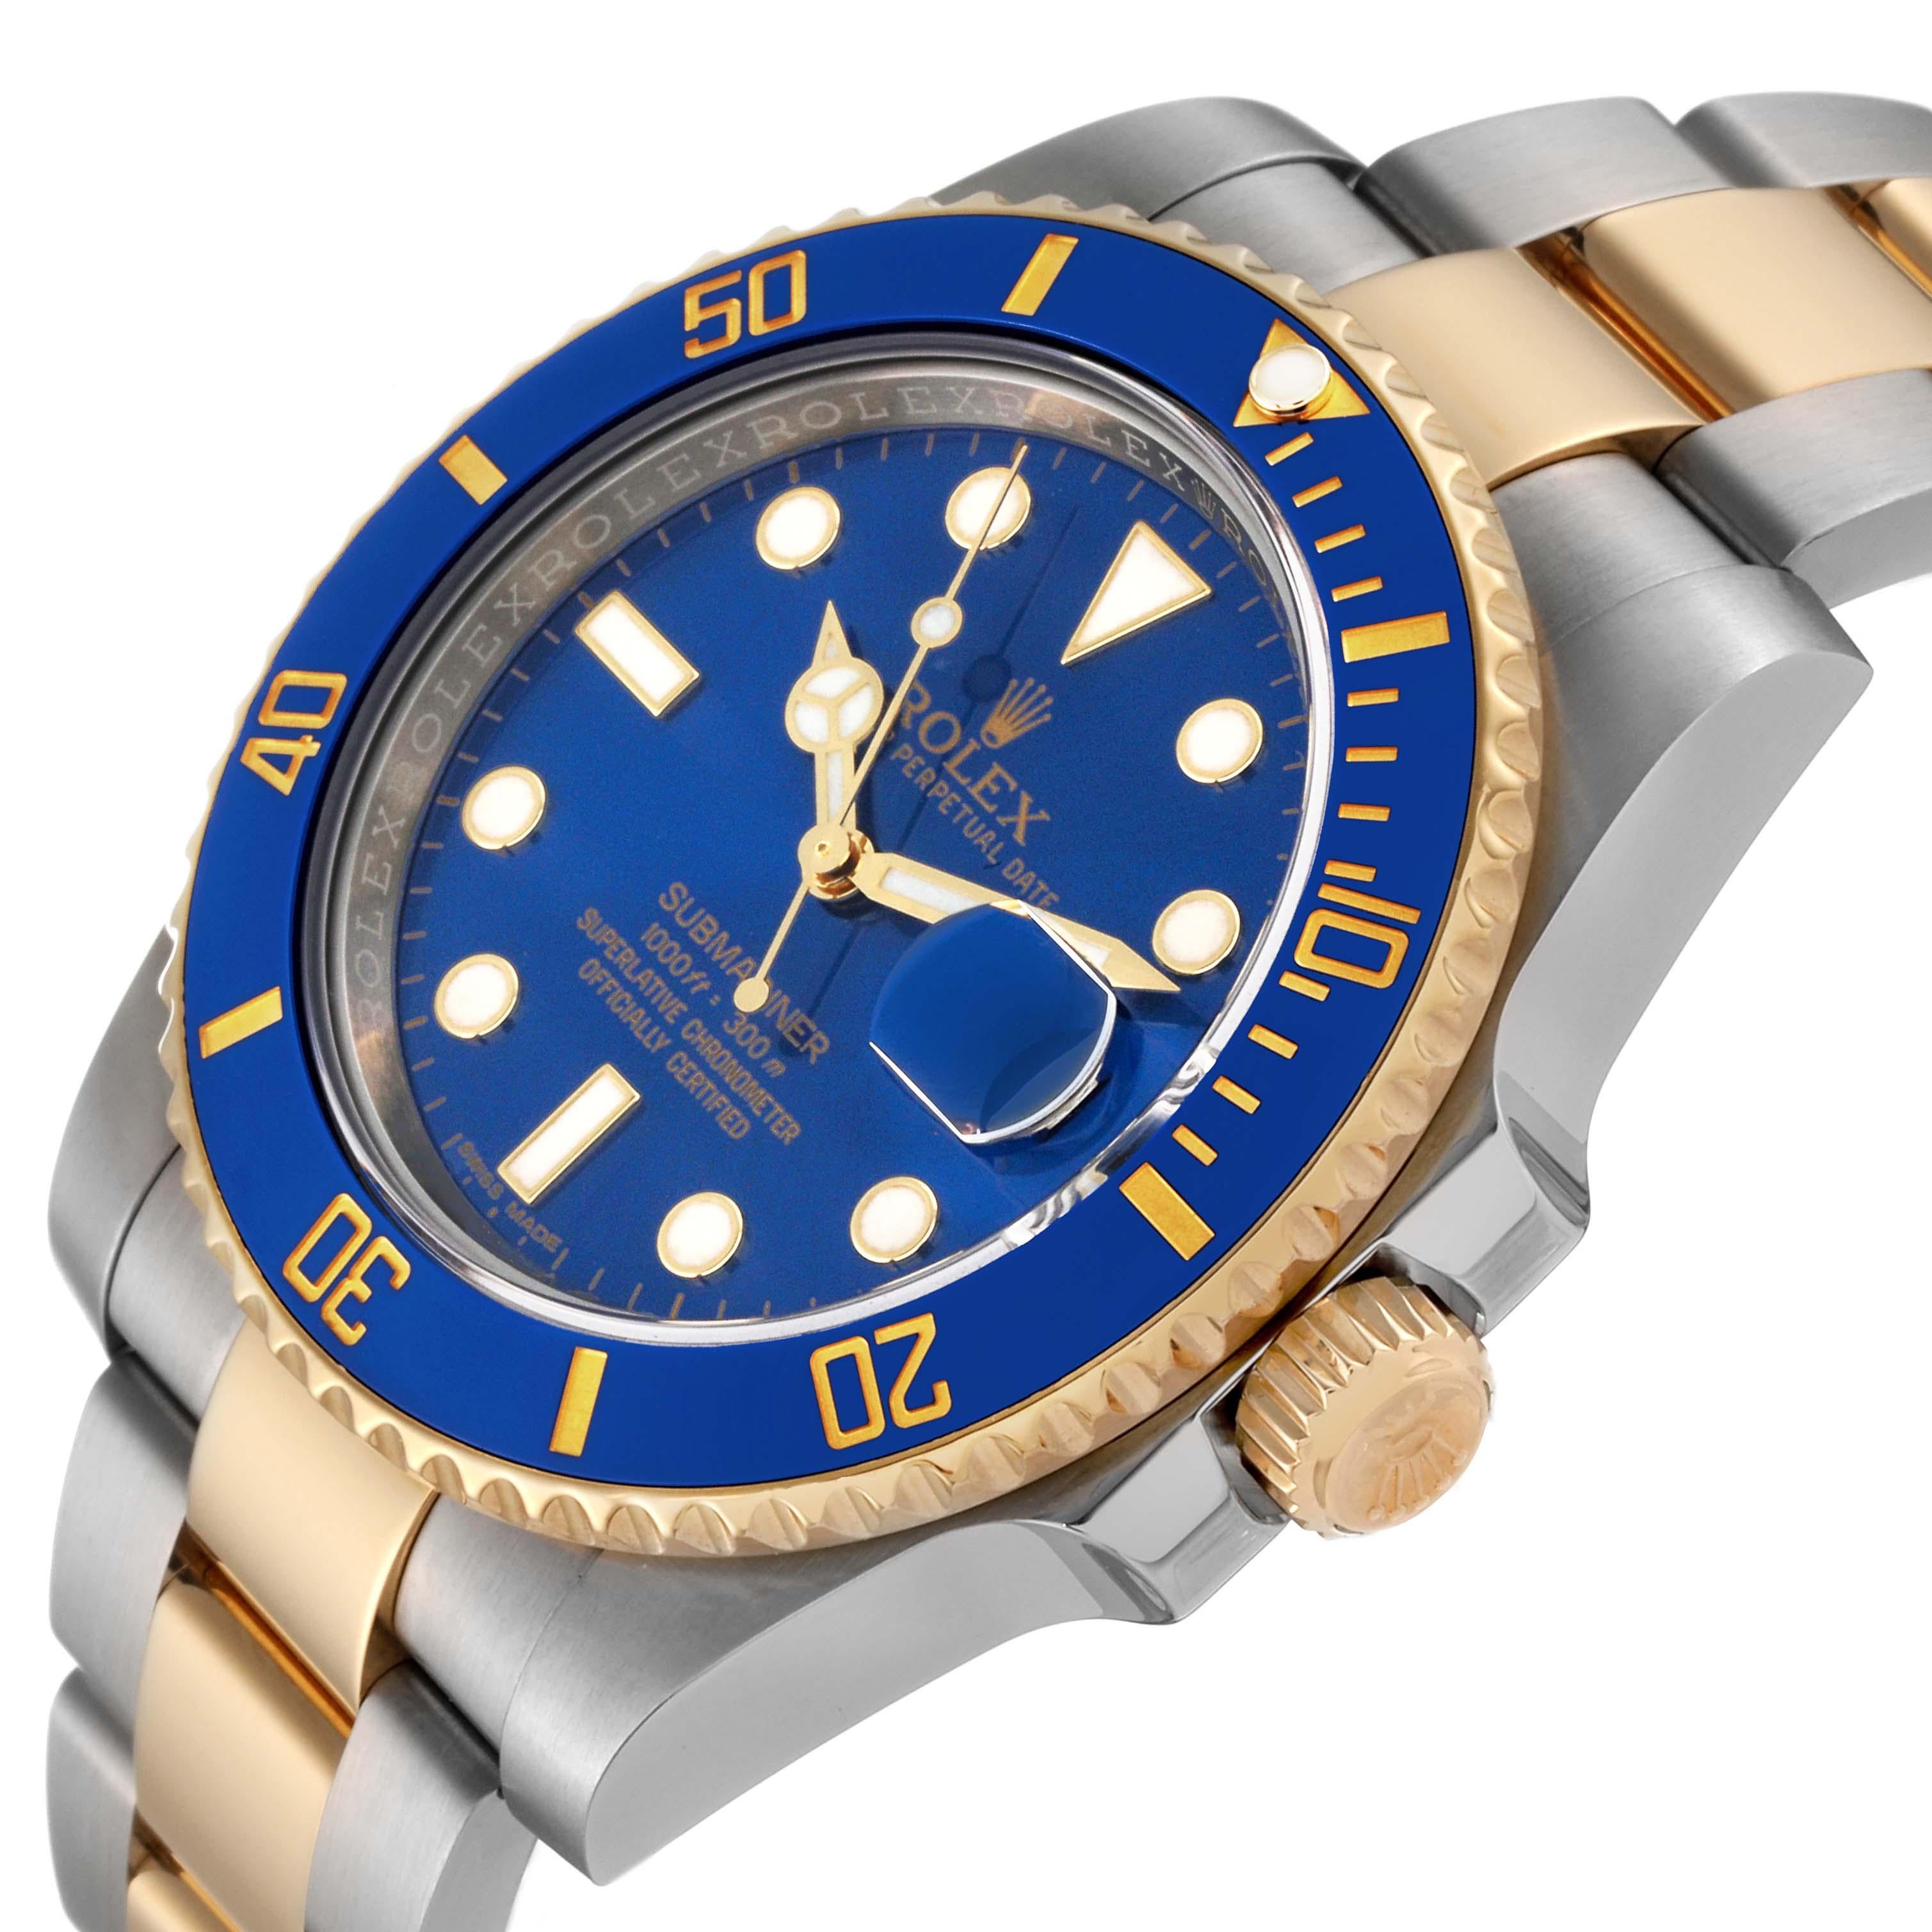 Rolex Submariner Steel Yellow Gold Blue Dial Mens Watch 116613 Box Card In Excellent Condition For Sale In Atlanta, GA